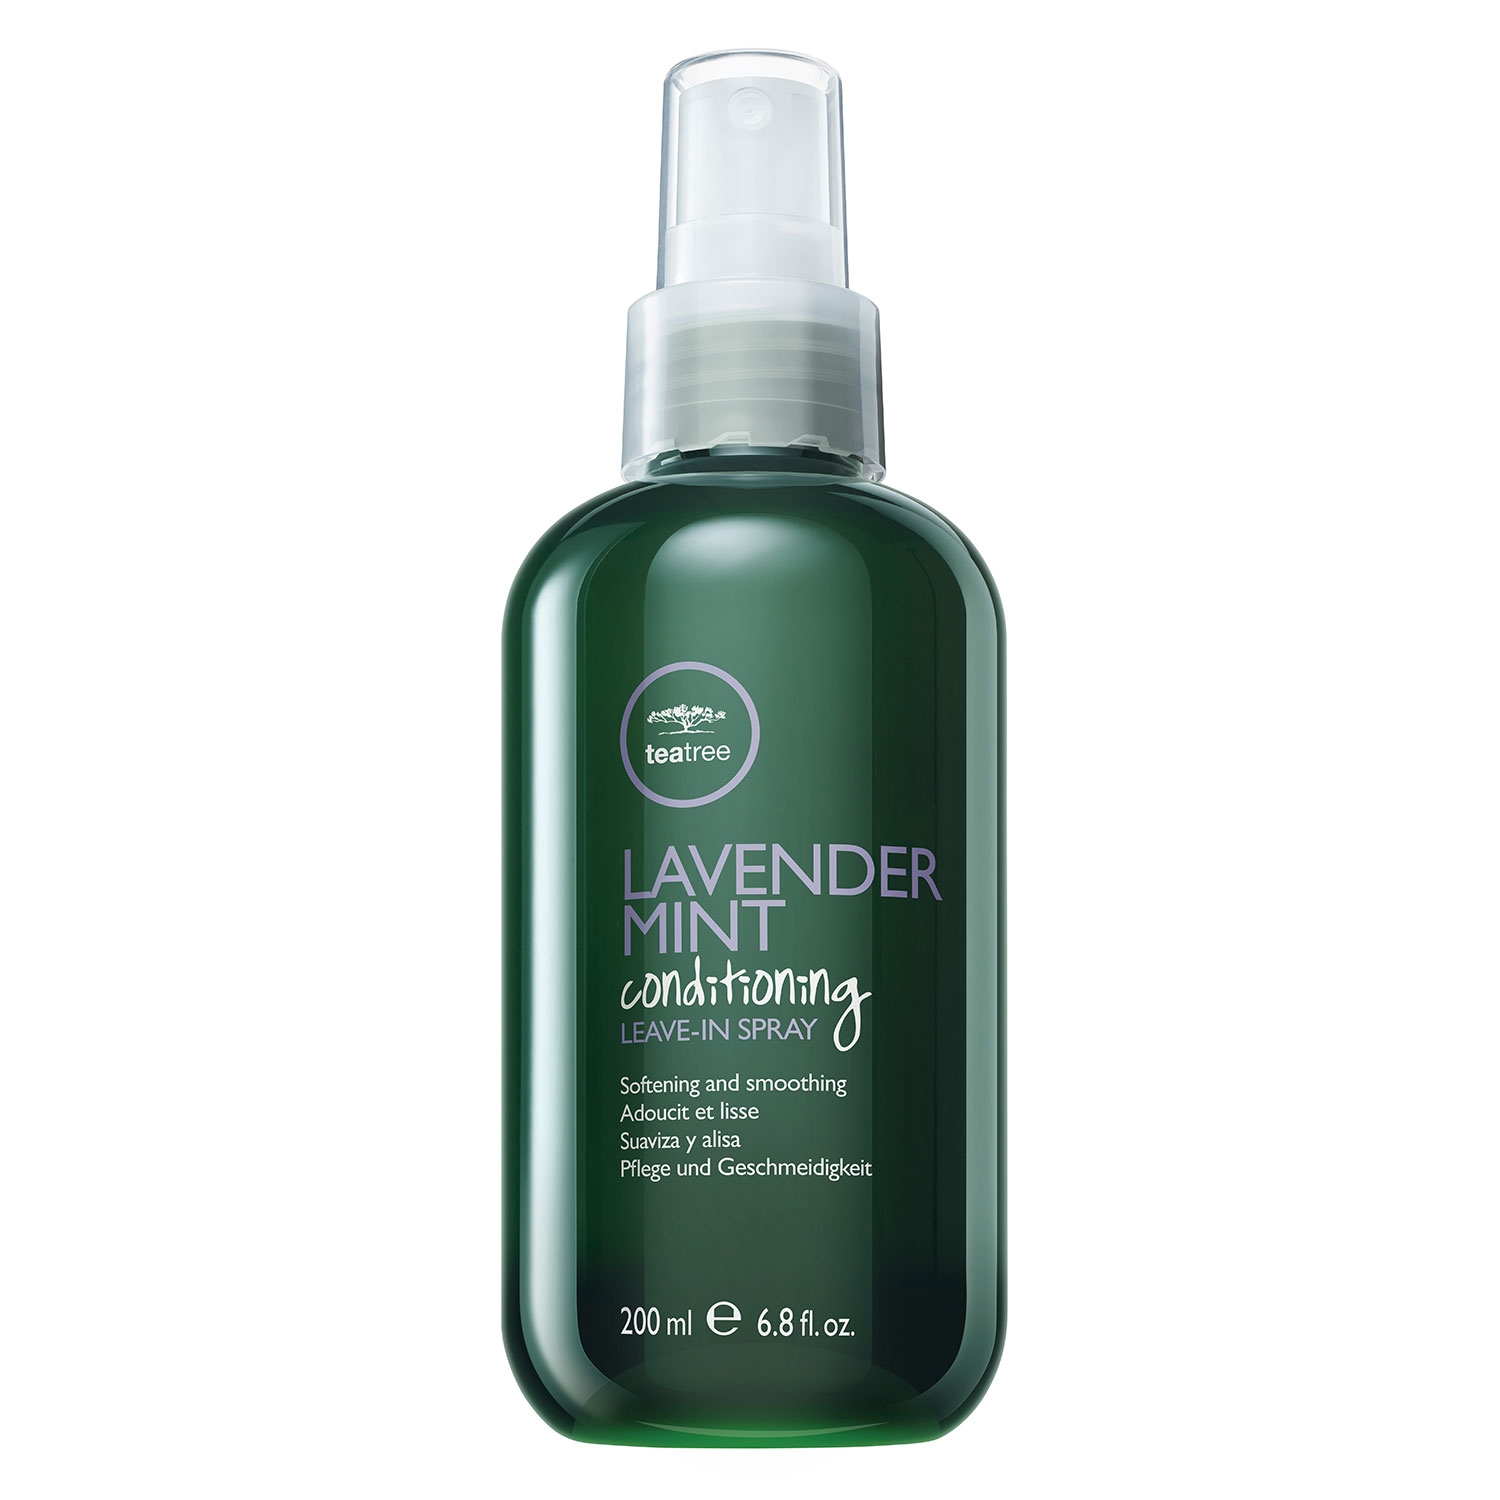 Product image from Tea Tree Lavender Mint - Conditioning Leave-In Spray